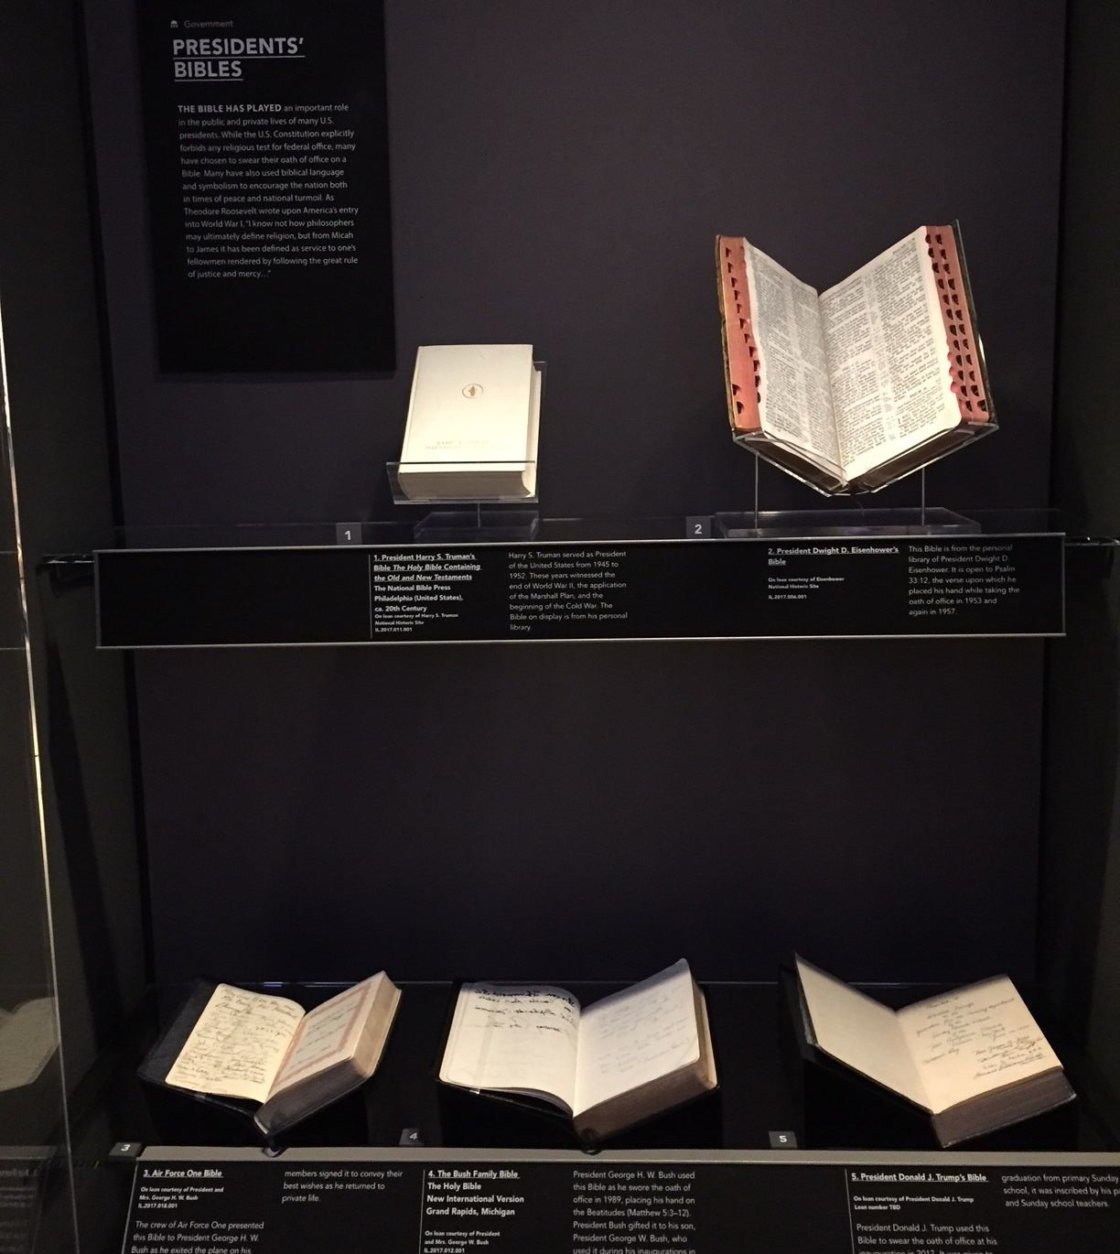 The Trump Bible joins Bibles that belonged to presidents Harry Truman, Dwight Eisenhower and both George W. Bush and George H.W. Bush. (Courtesy Museum of the Bible)